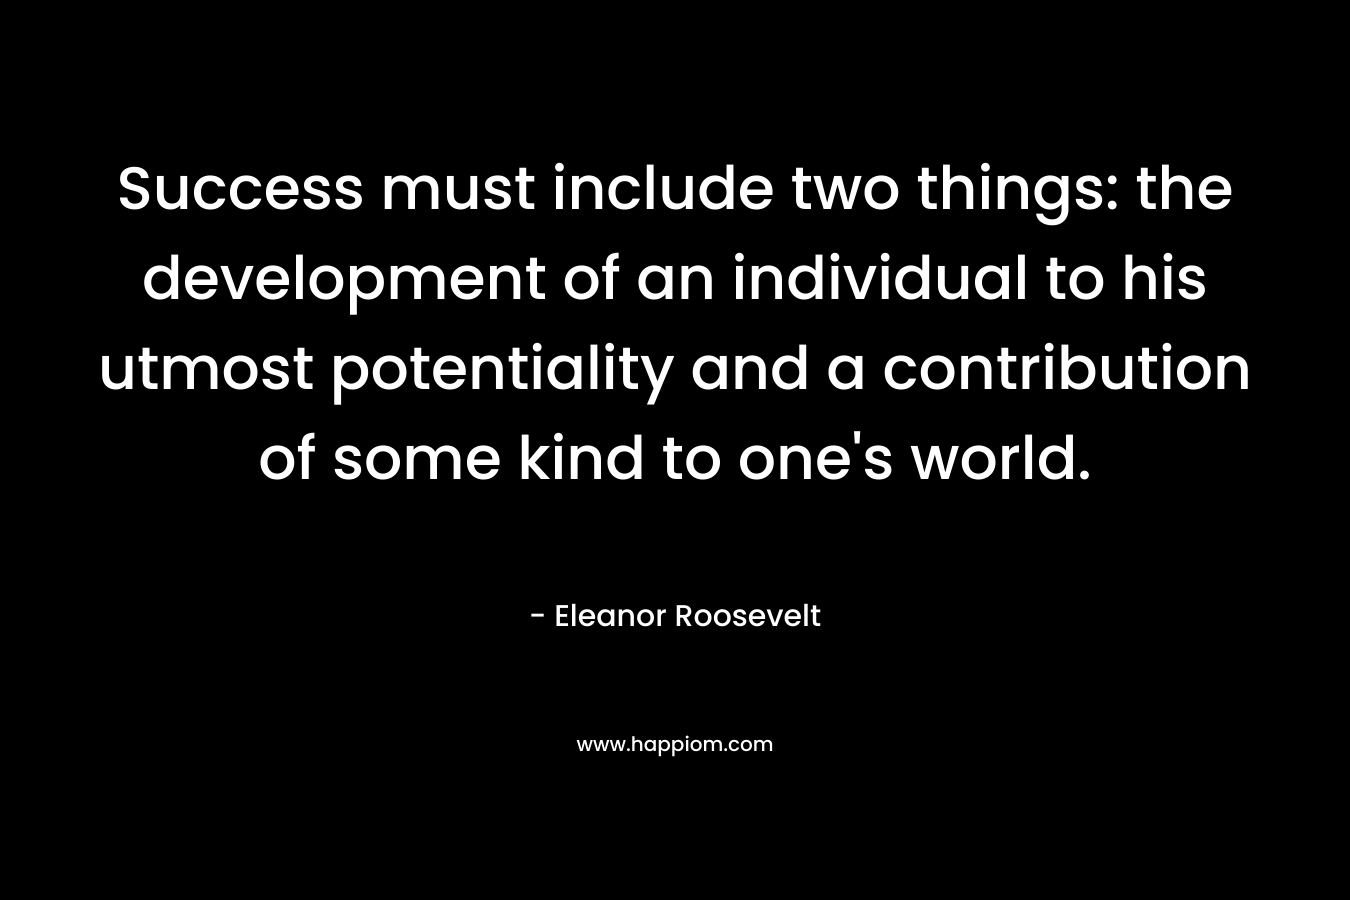 Success must include two things: the development of an individual to his utmost potentiality and a contribution of some kind to one’s world. – Eleanor Roosevelt